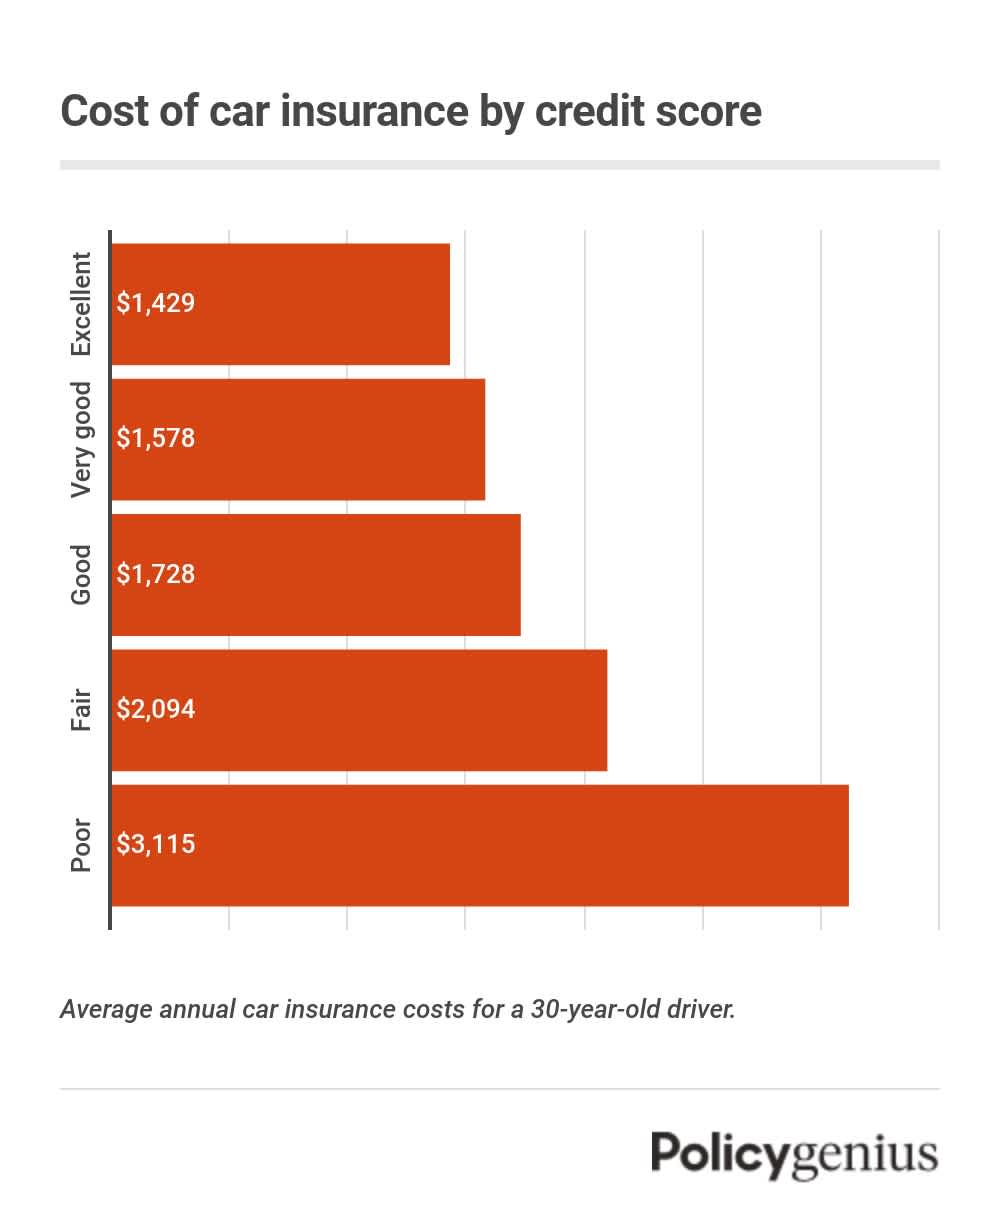 Bar graph of the cost of car insurance by credit tier.